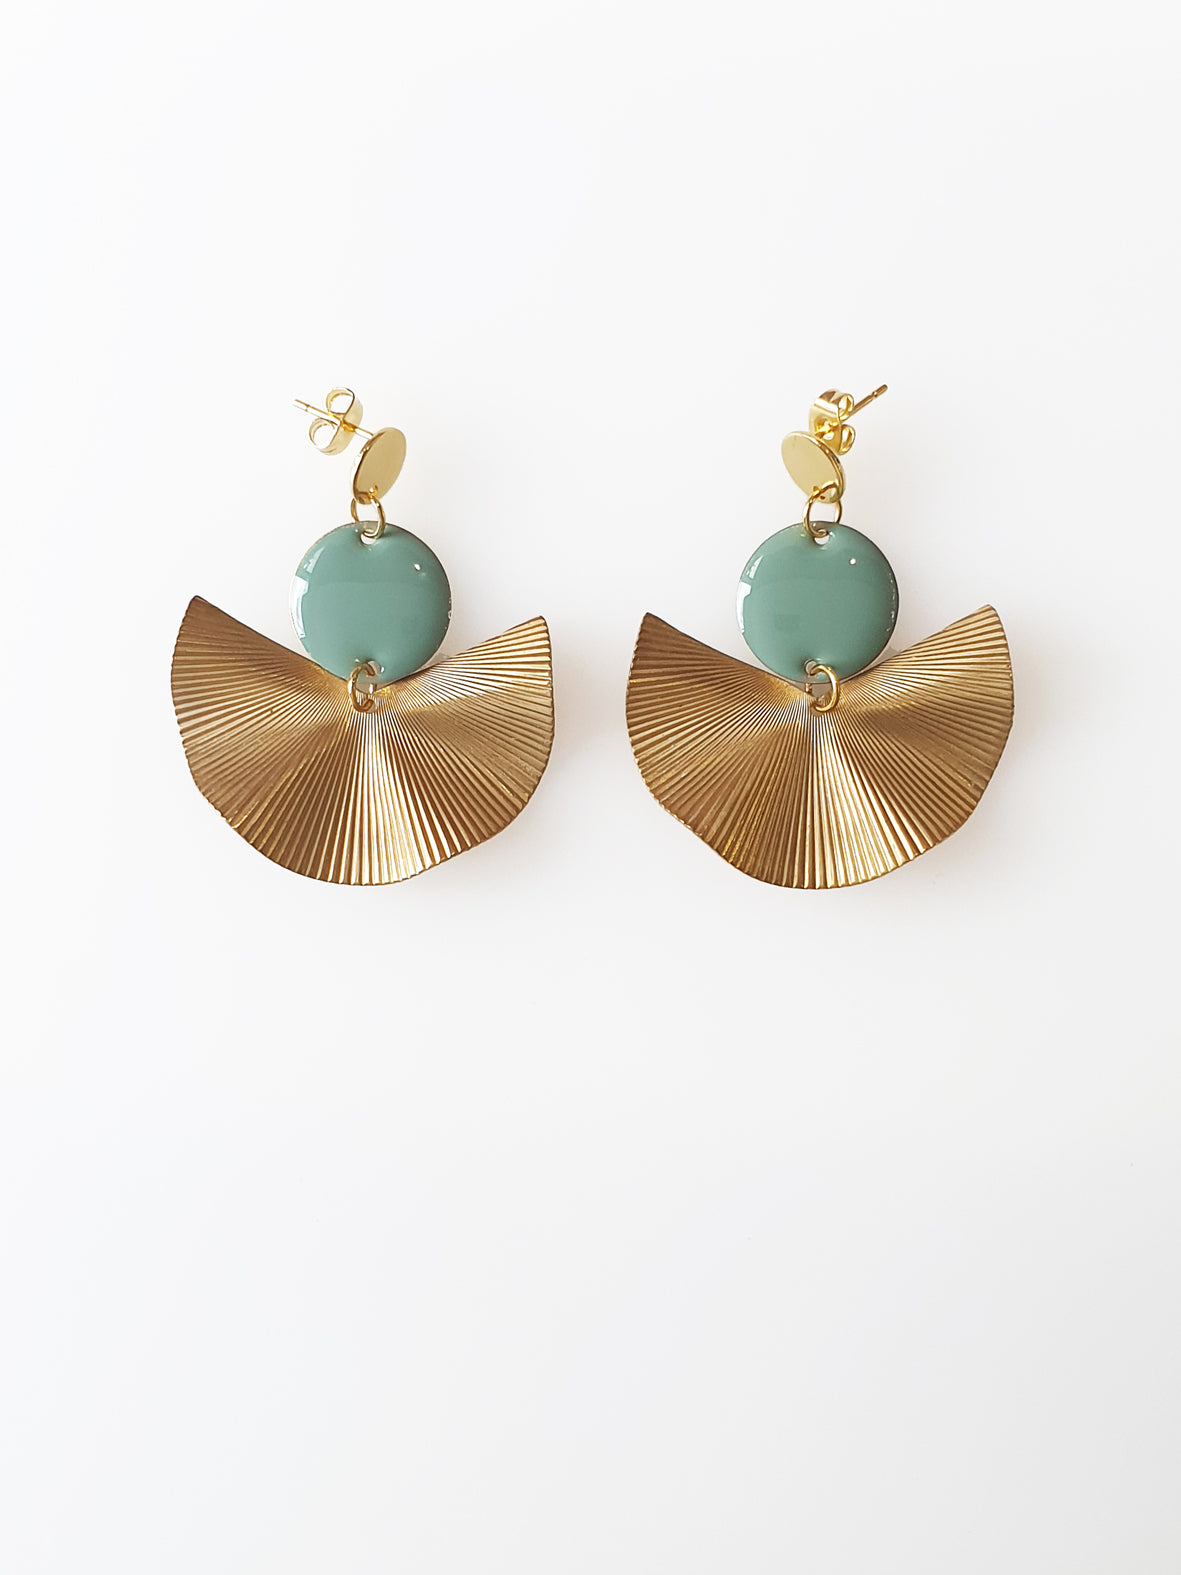 A pair of stud dangle earrings sit against a white background. They feature a duckegg enamel connector dot and a textured brass fan piece.